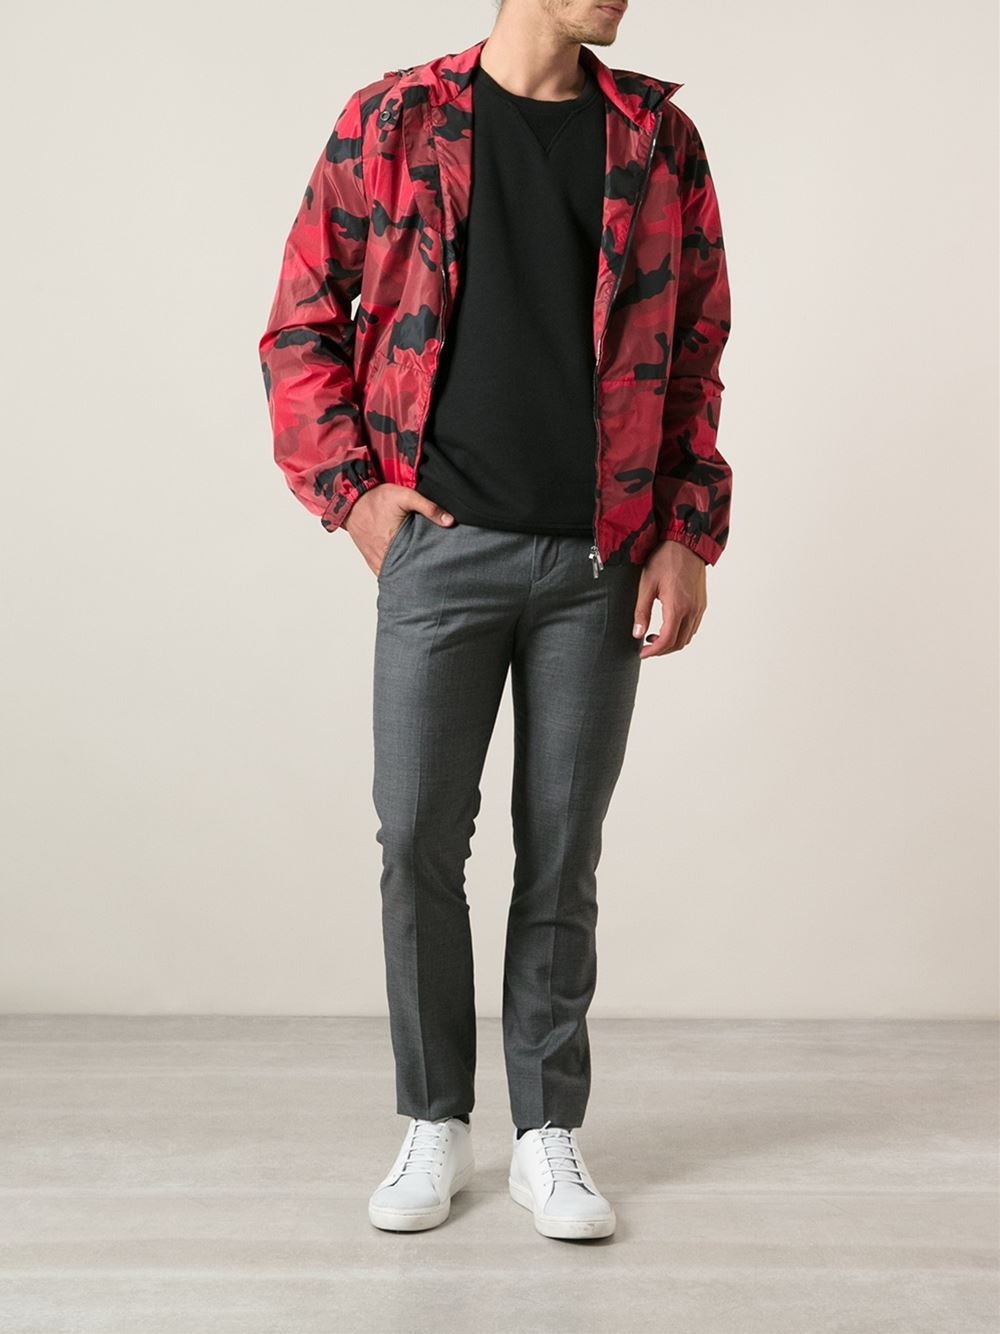 Valentino Camouflage Print Jacket in Red for Men - Lyst